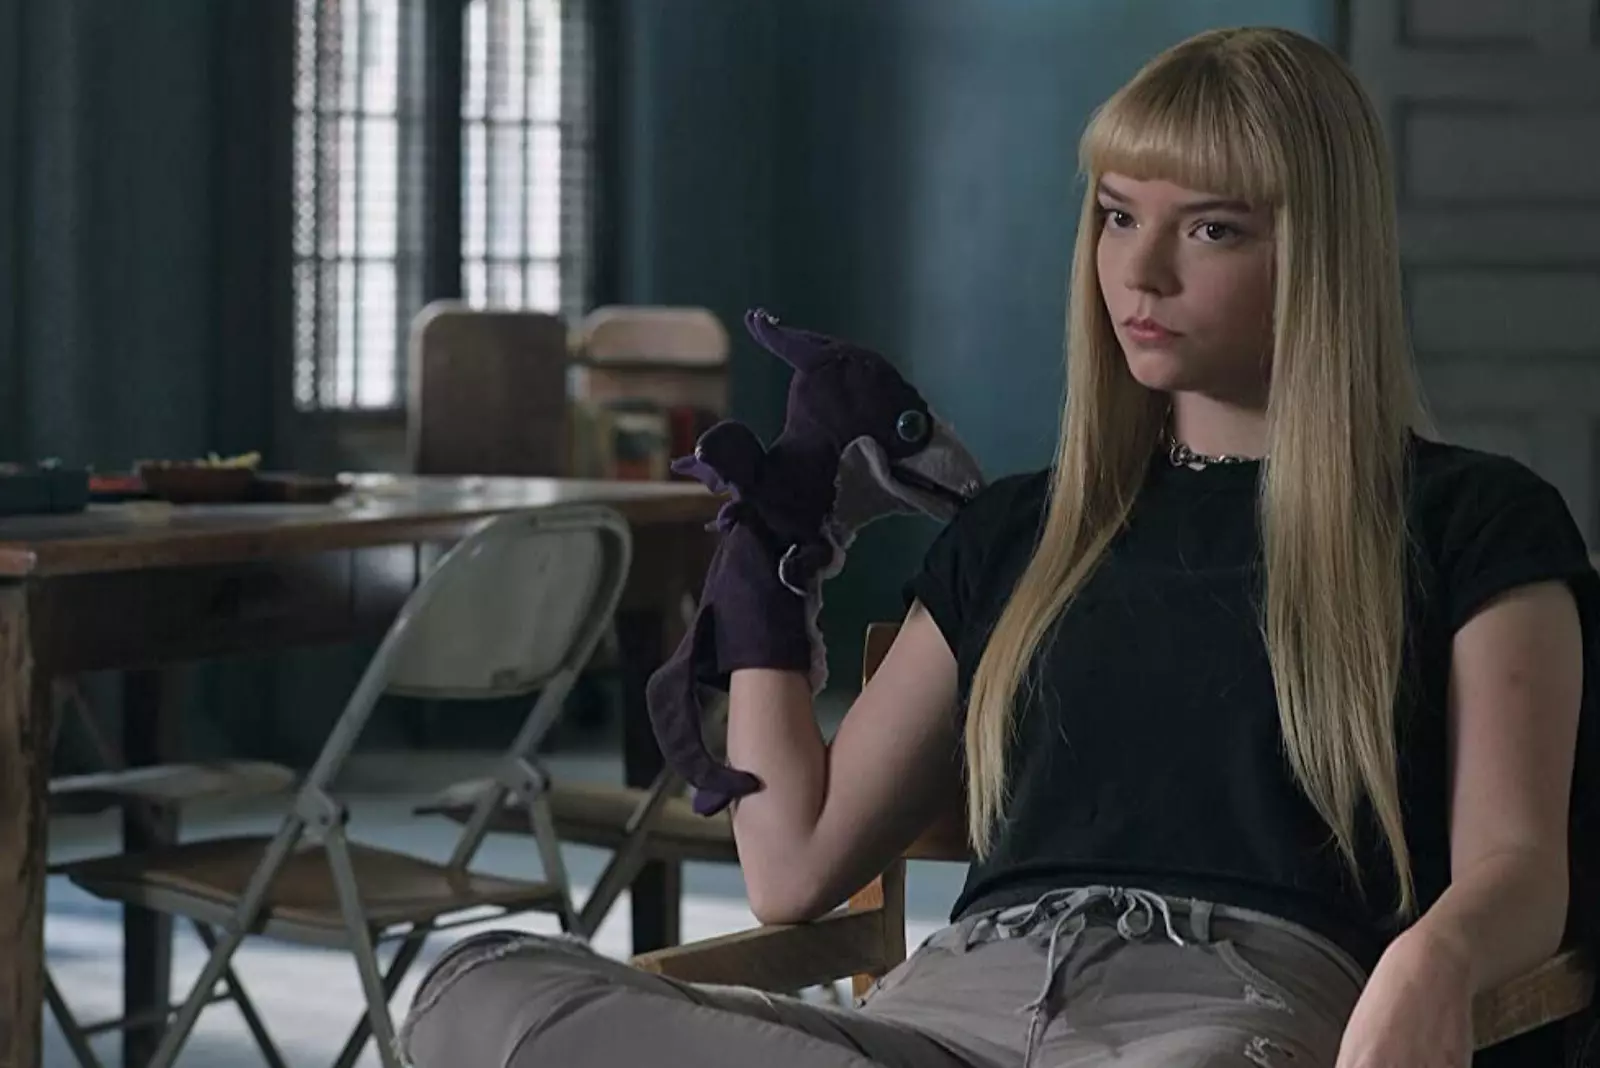 Is New Mutants an Ending for the Fox X-Men Universe?